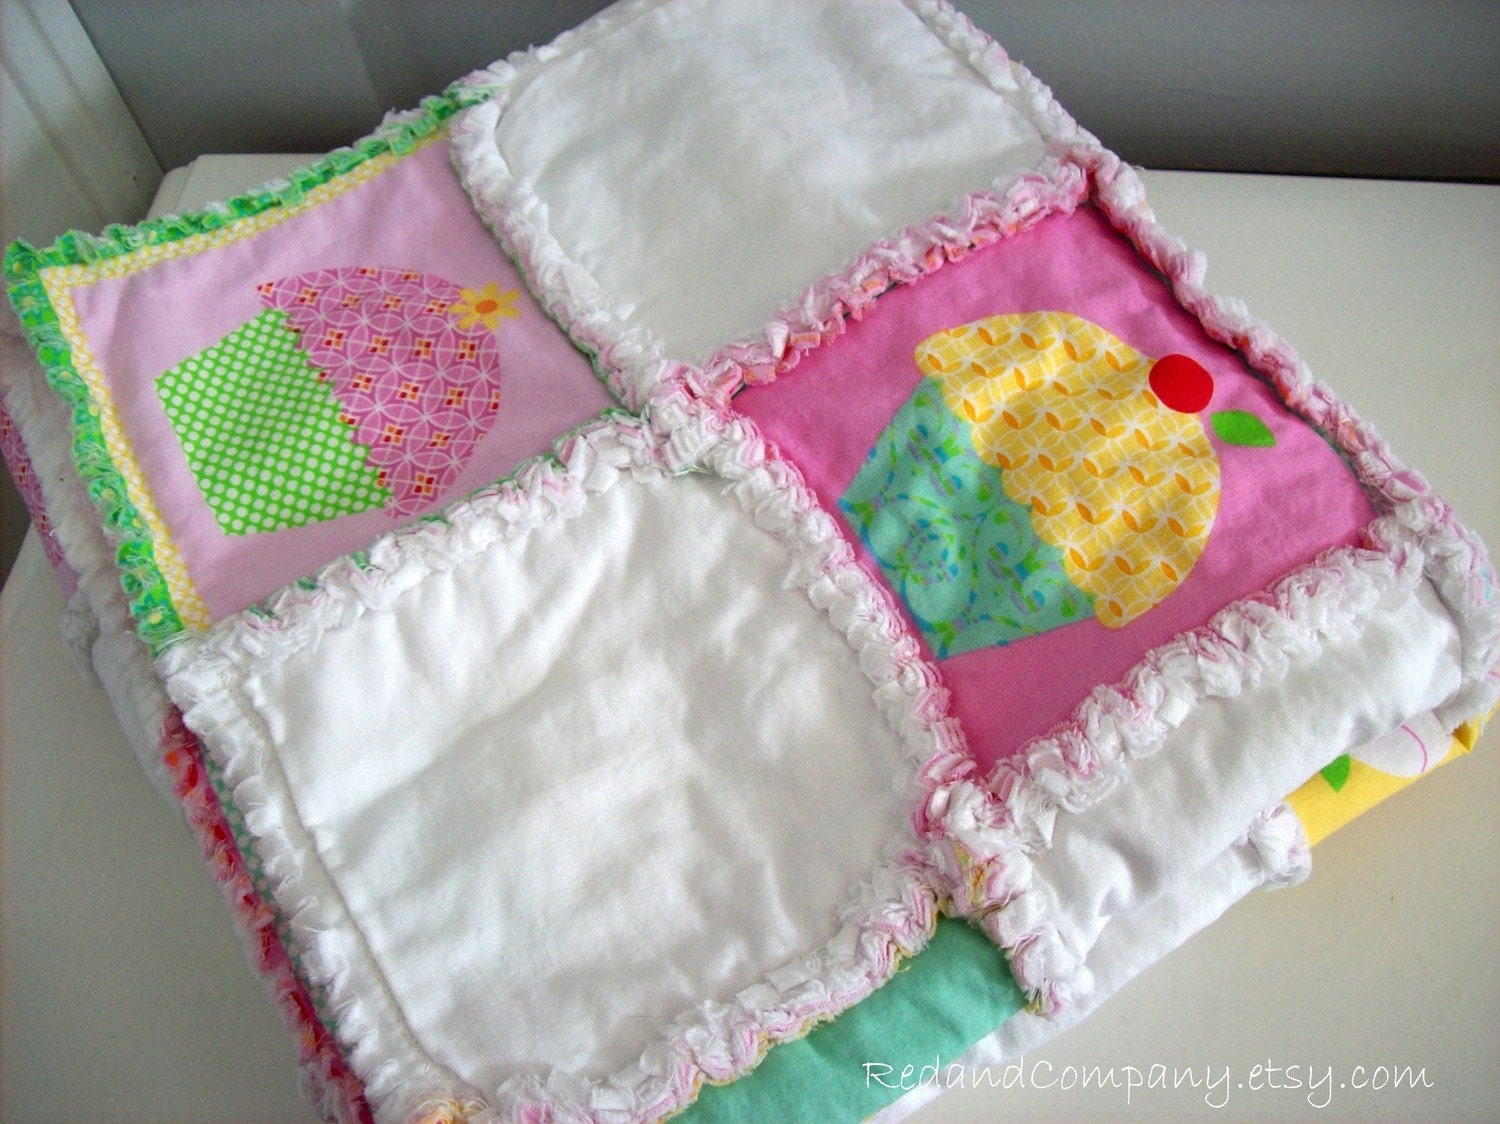 Baby Rag Quilt 36 X 36 Pretty Cupcakes. From RedandCompany